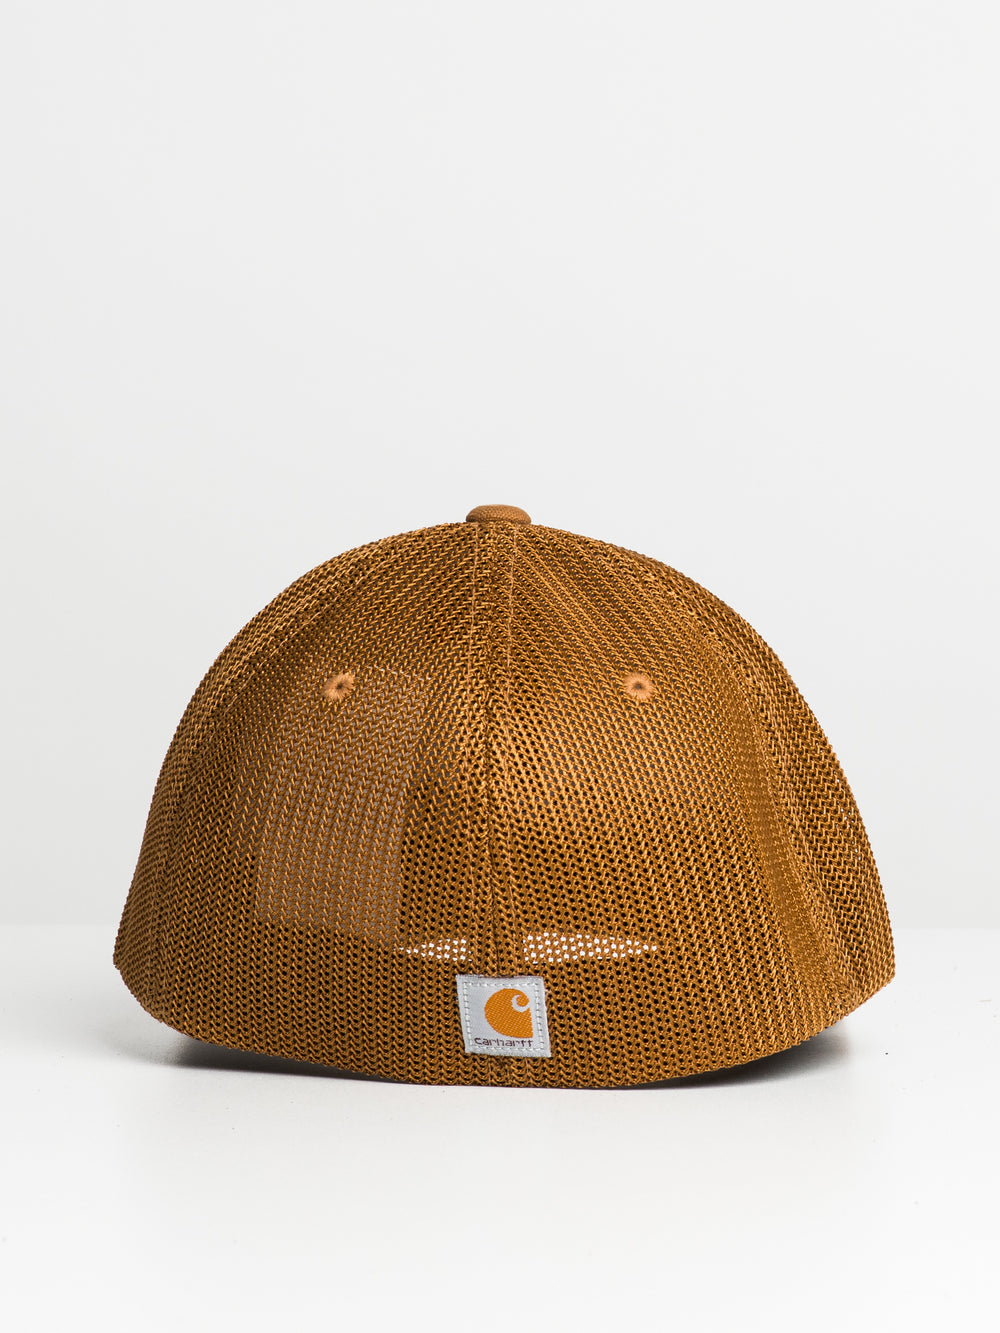 CARHARTT CANVAS MESHBACK HAT - BROWN - CLEARANCE